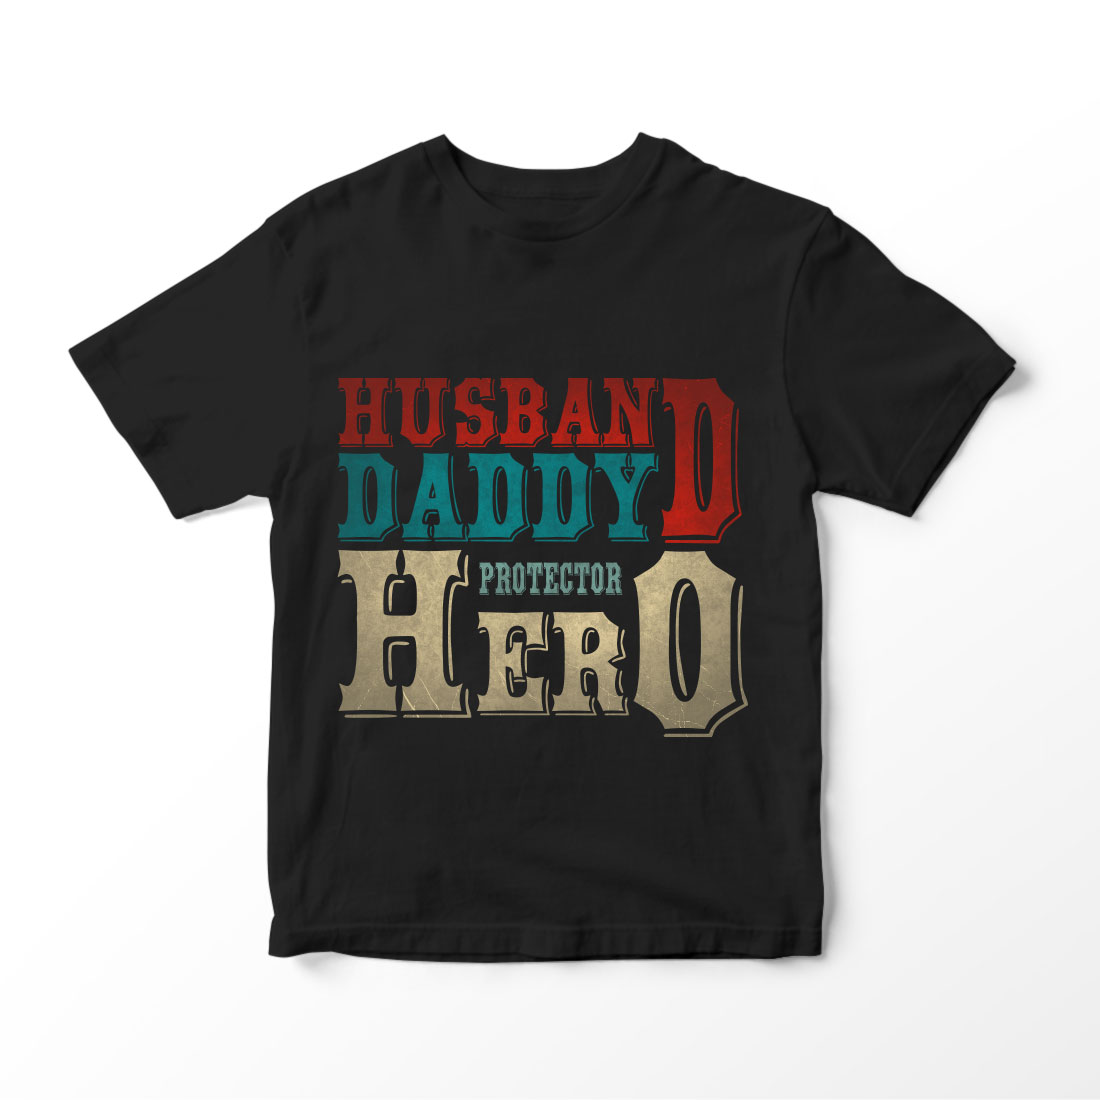 Father's Day T-Shirt- Dad T-Shirt Design- Father's Day T-shirt- Happy Father's Day T-shirt design ideas- Dad's Day- Papa Son- Father's Day shirt ideas for Family- T-shirt Design- Father's Day T-shirt- Trendy T-shirt preview image.